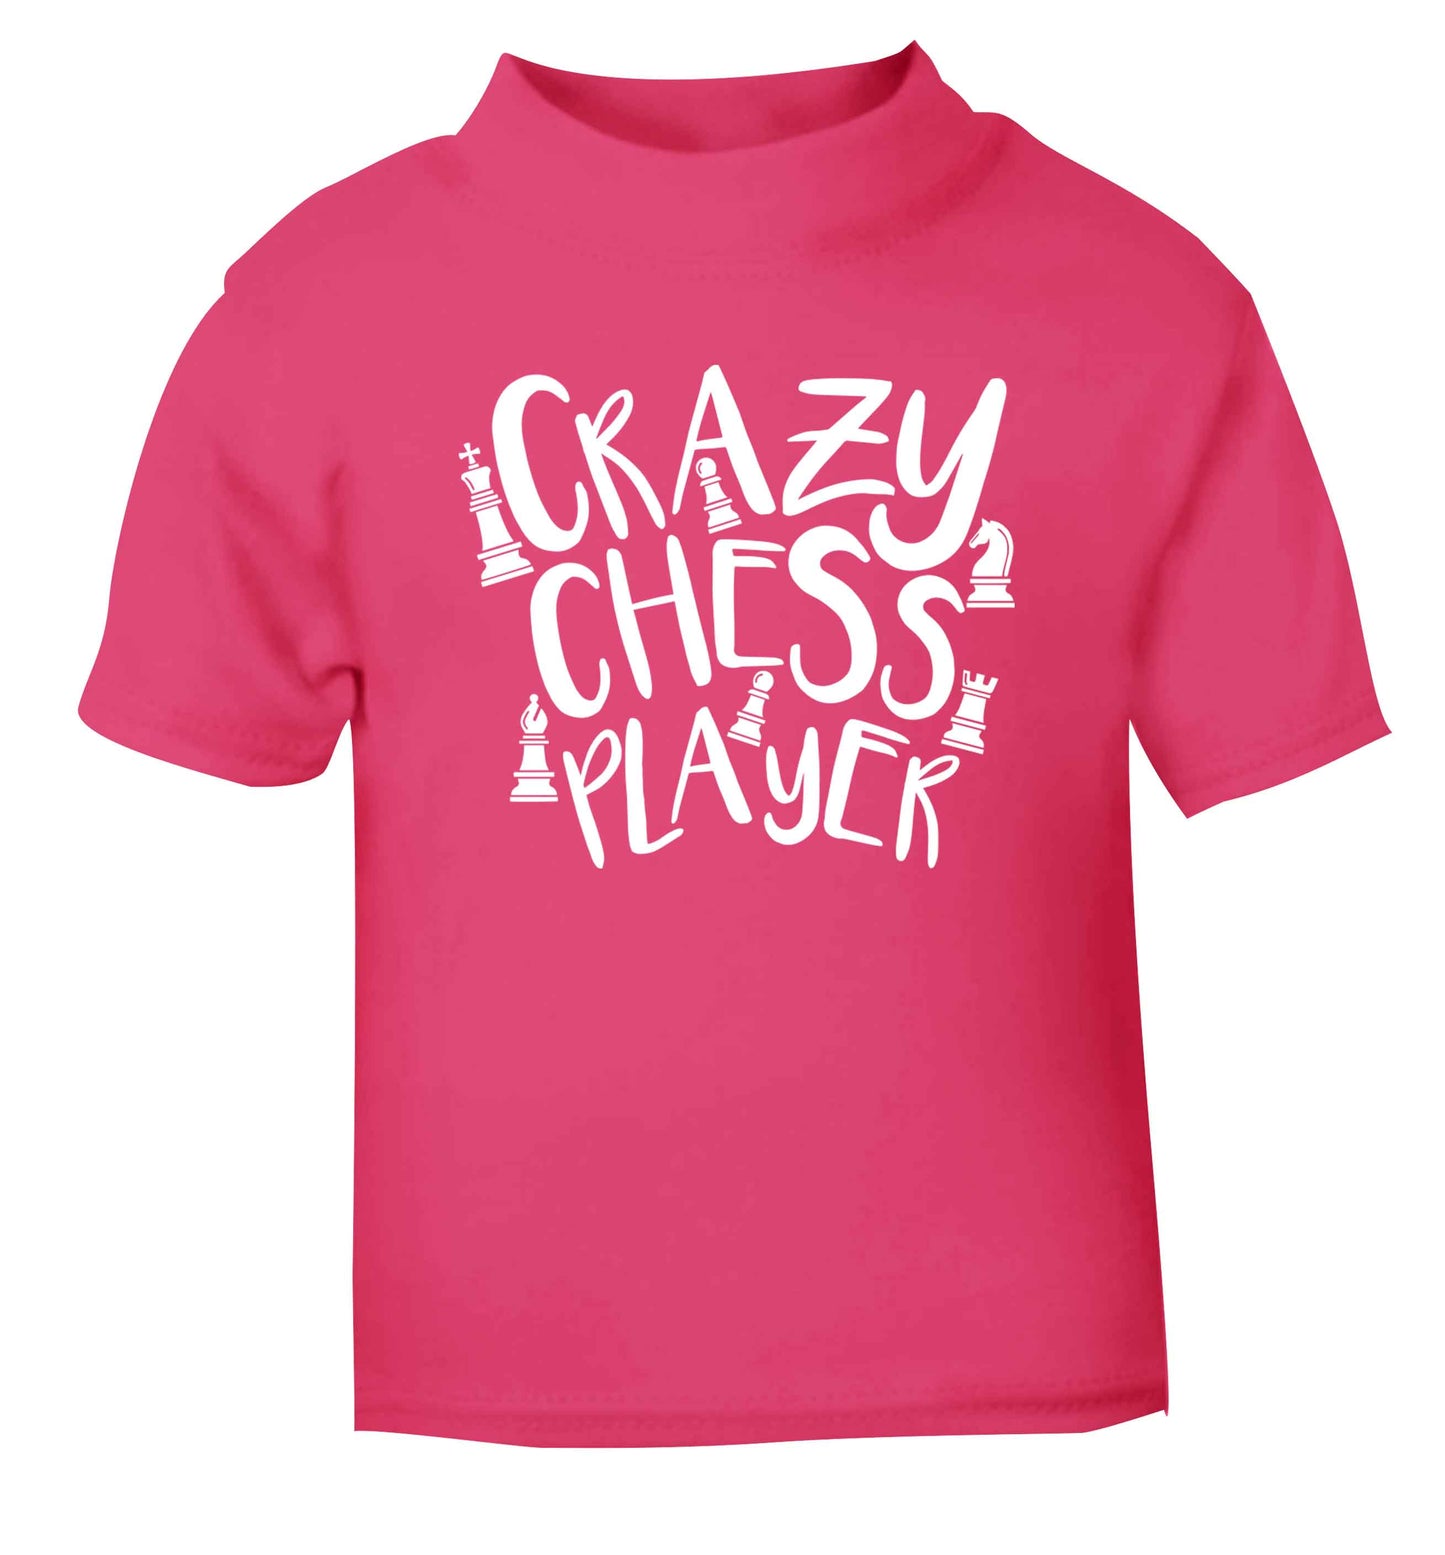 Crazy chess player pink Baby Toddler Tshirt 2 Years